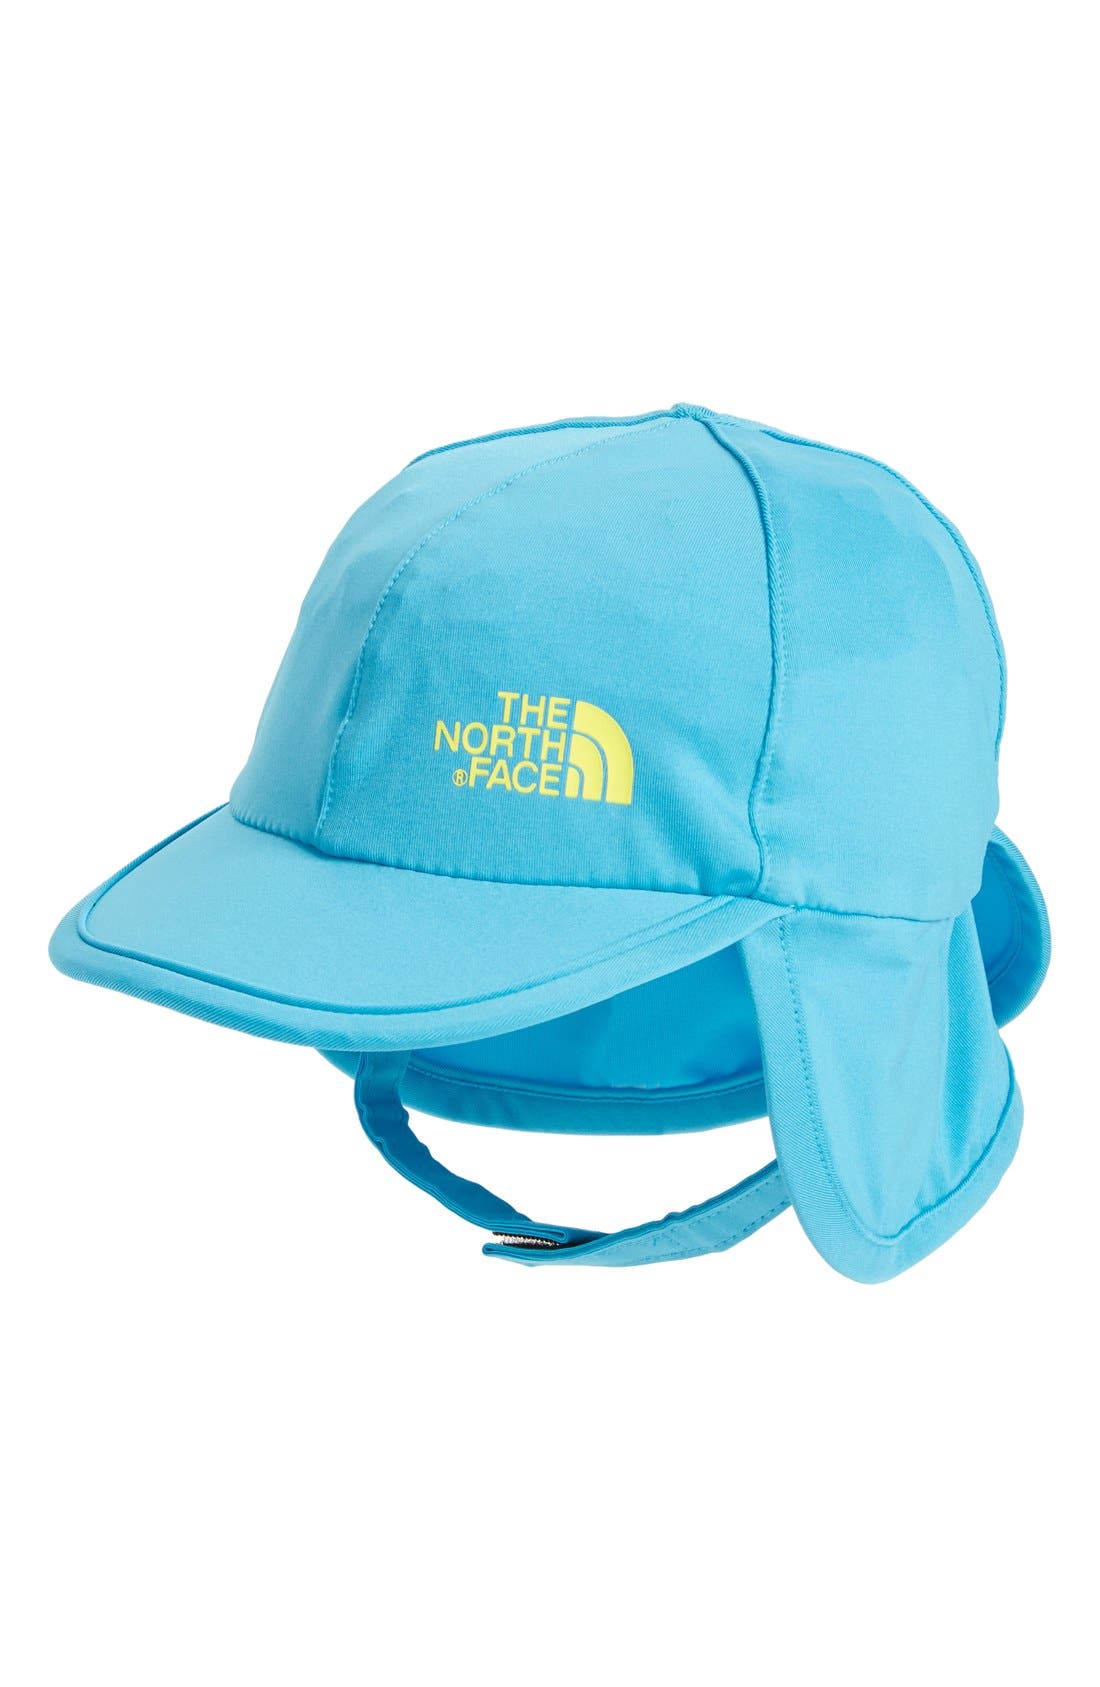 The North Face 'Sun Buster' Hat (Baby 